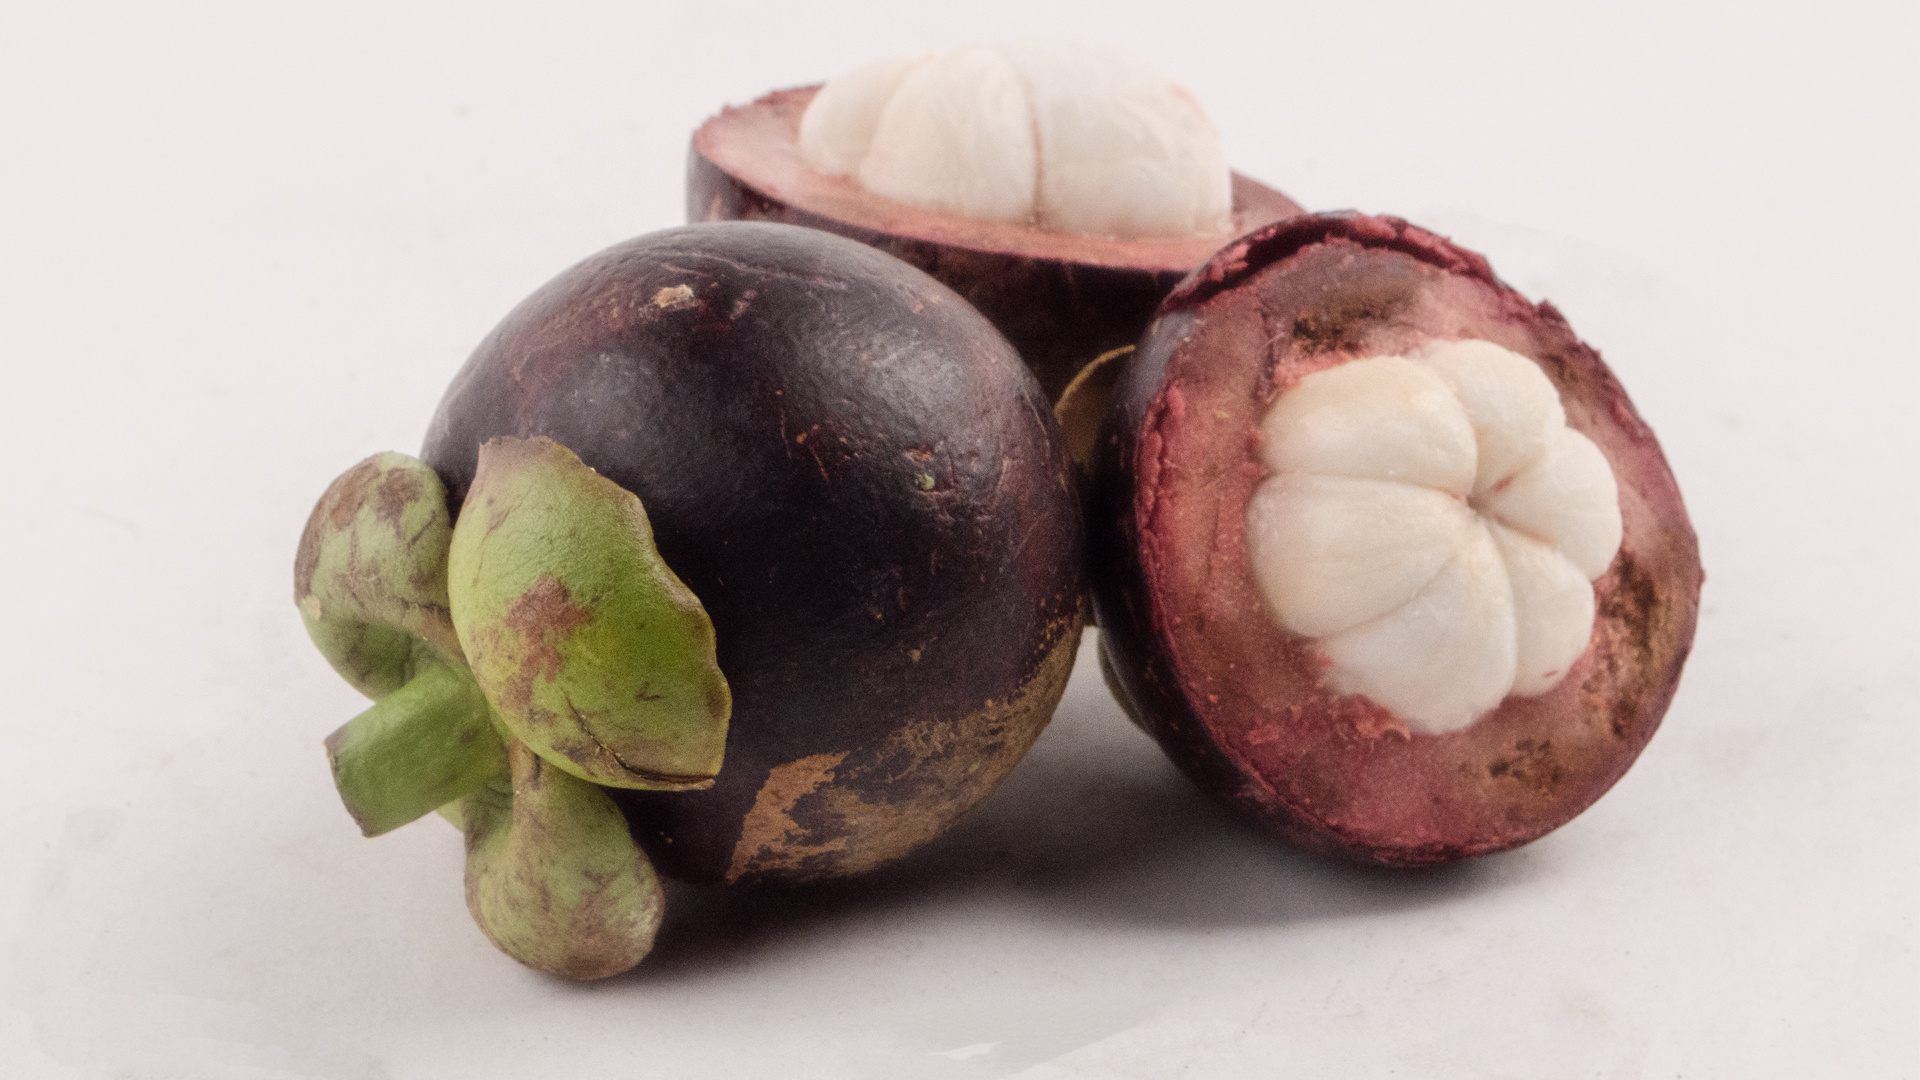 Mangosteen: National fruit of Thailand, Juicy, white flesh inside is highly prized. 1920x1080 Full HD Wallpaper.